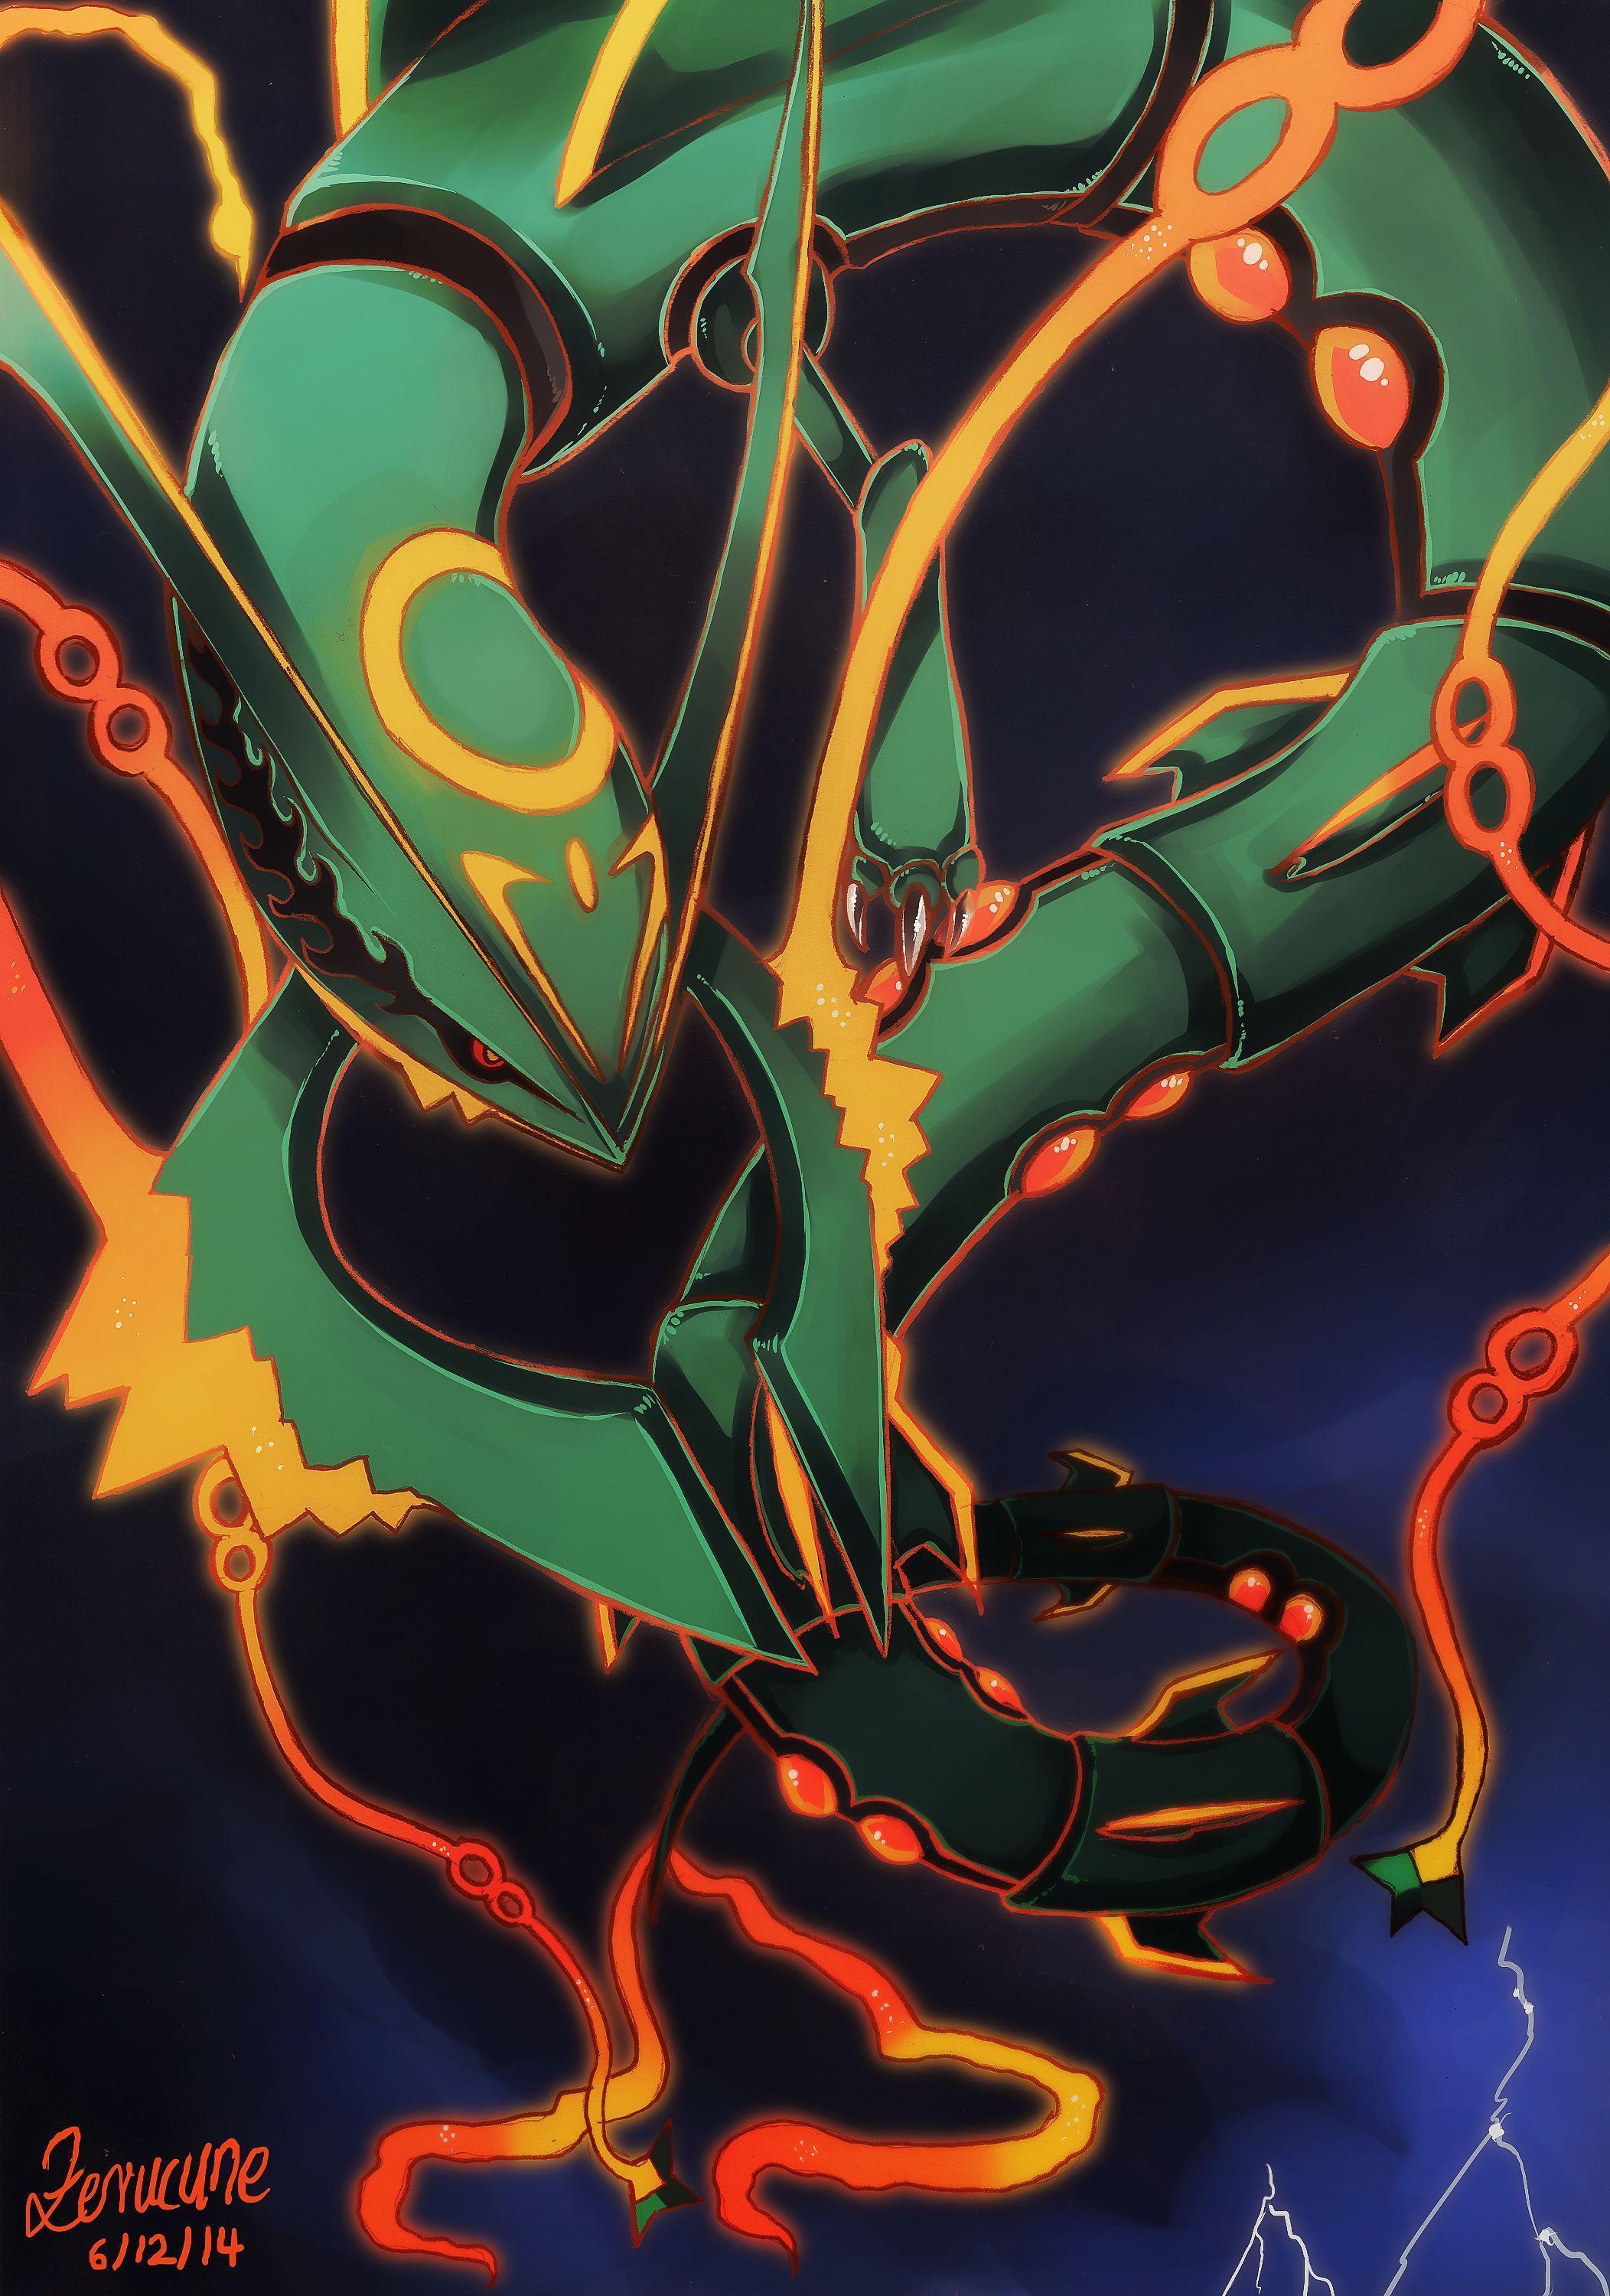 Rayquaza 1080P, 2K, 4K, 5K HD wallpapers free download